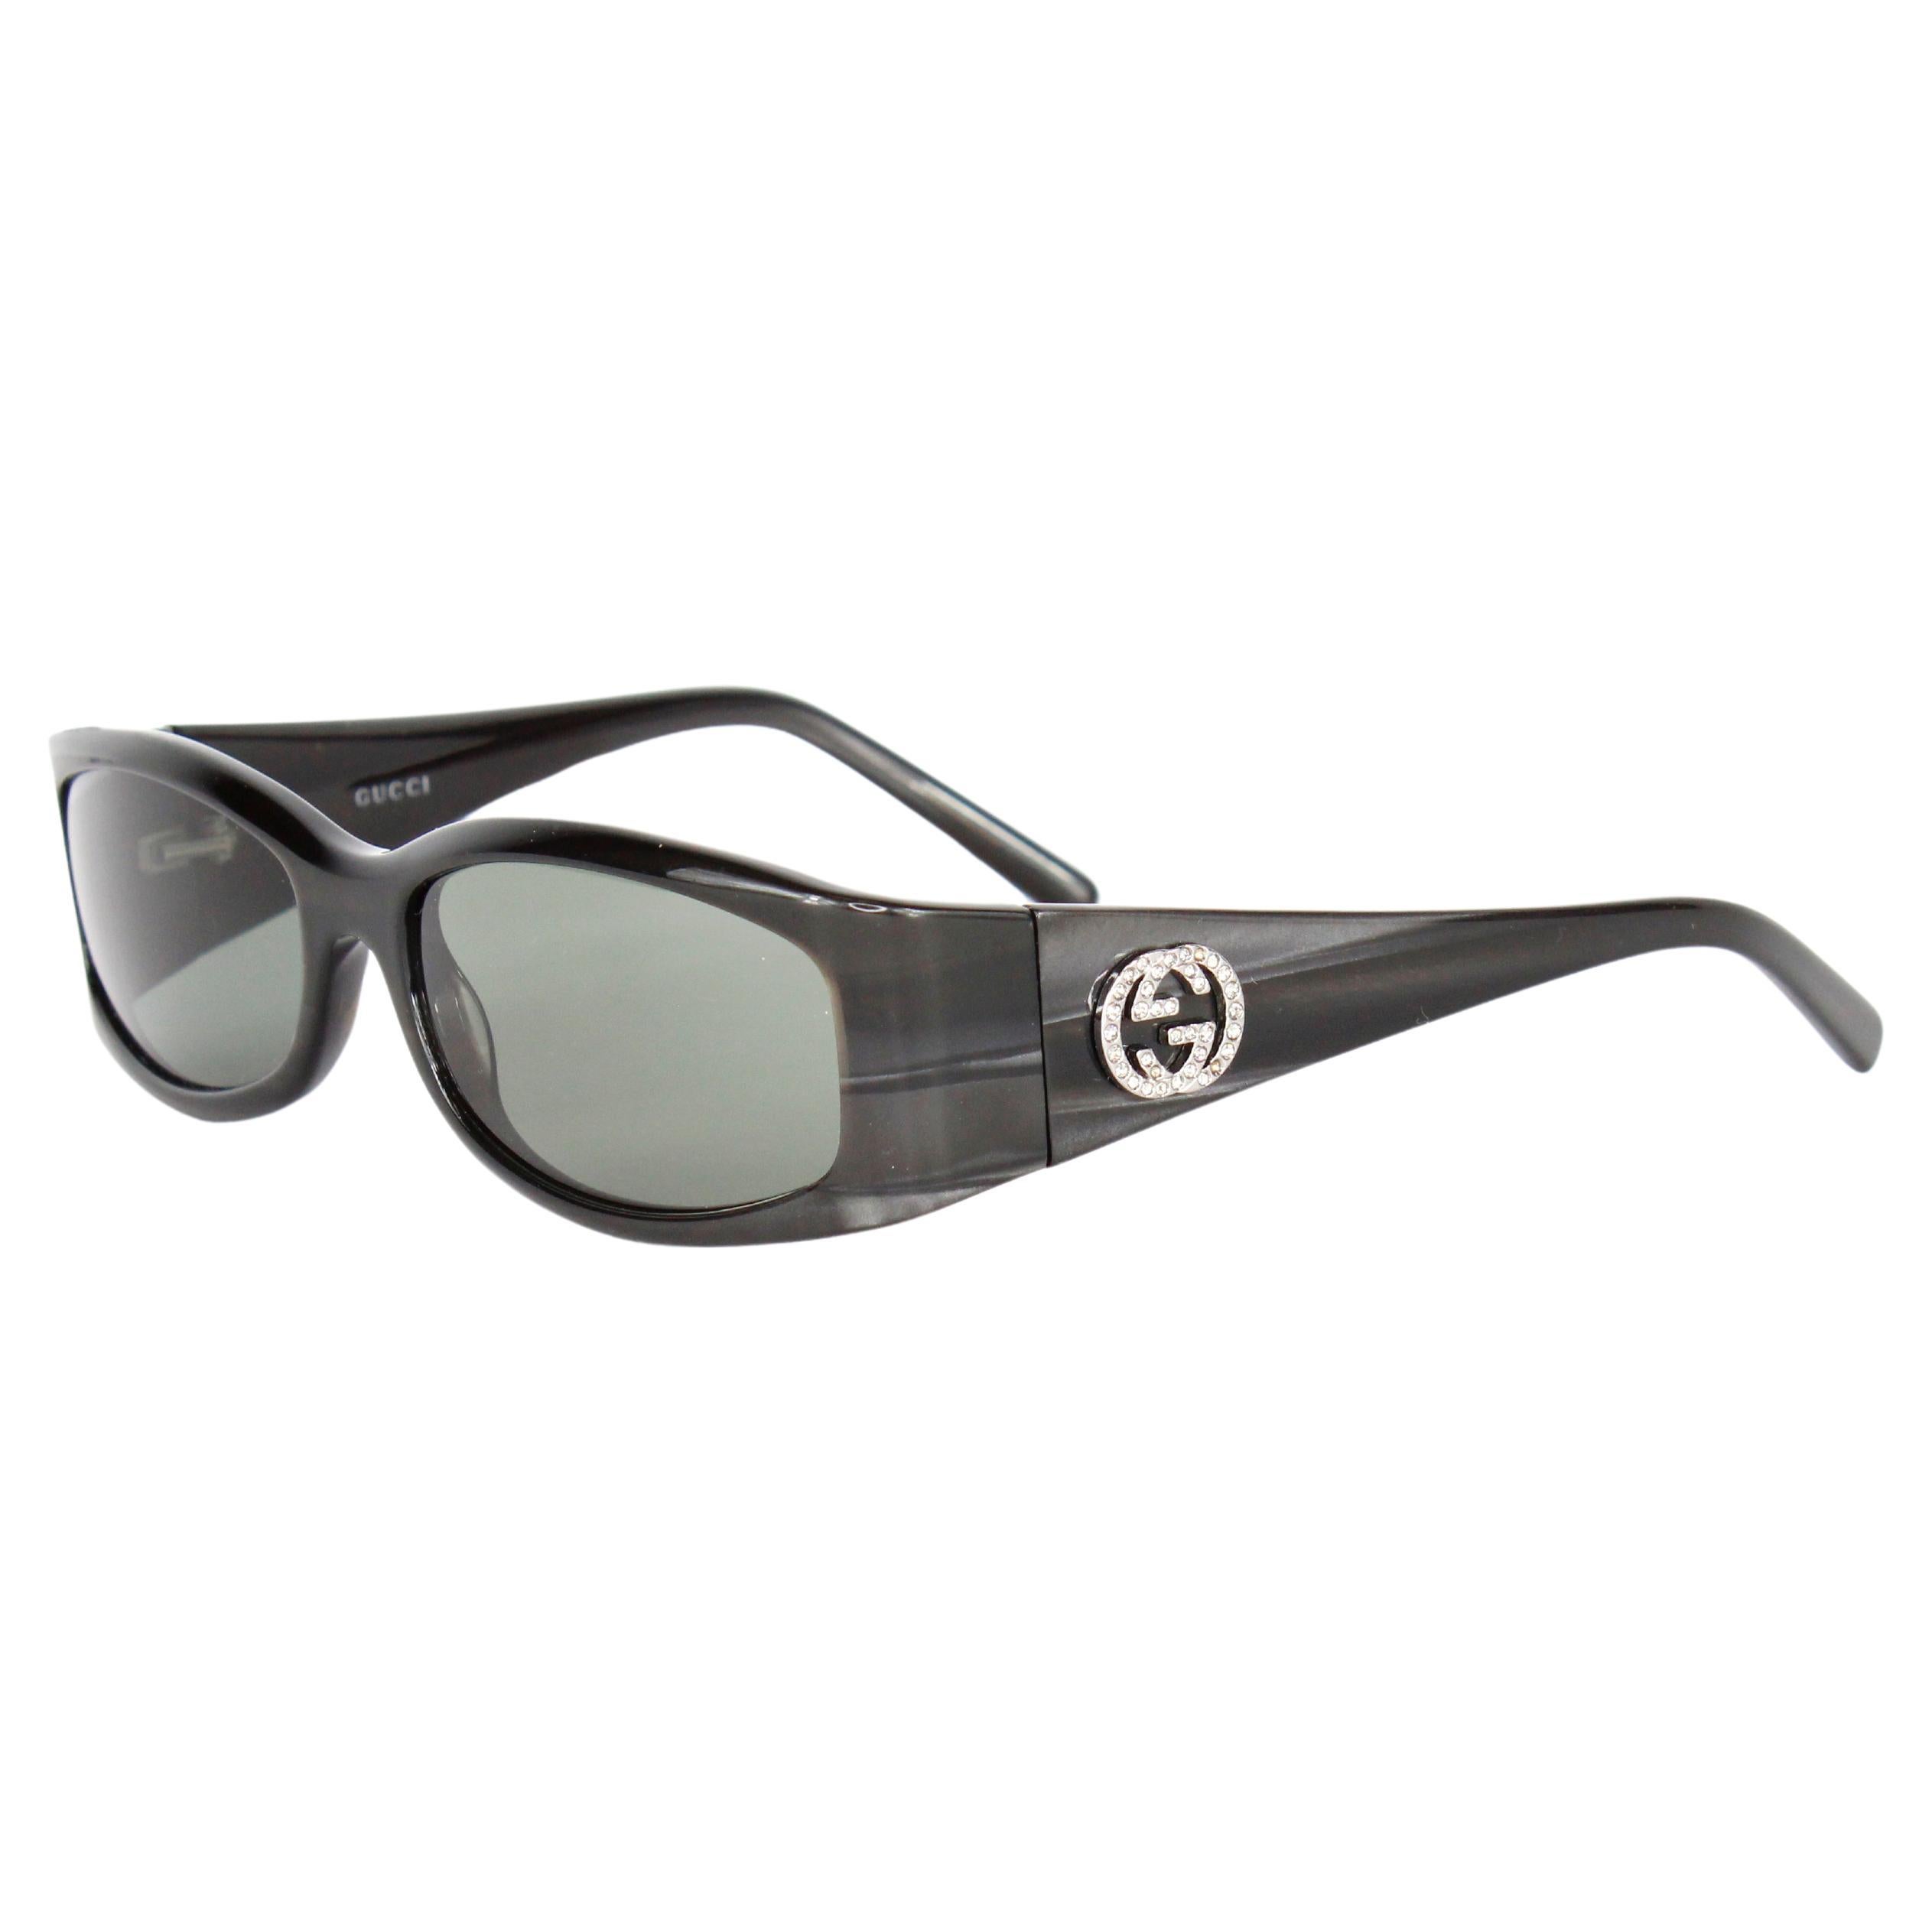 Gucci by Tom Ford GG Interlocking embellished Sunglasses